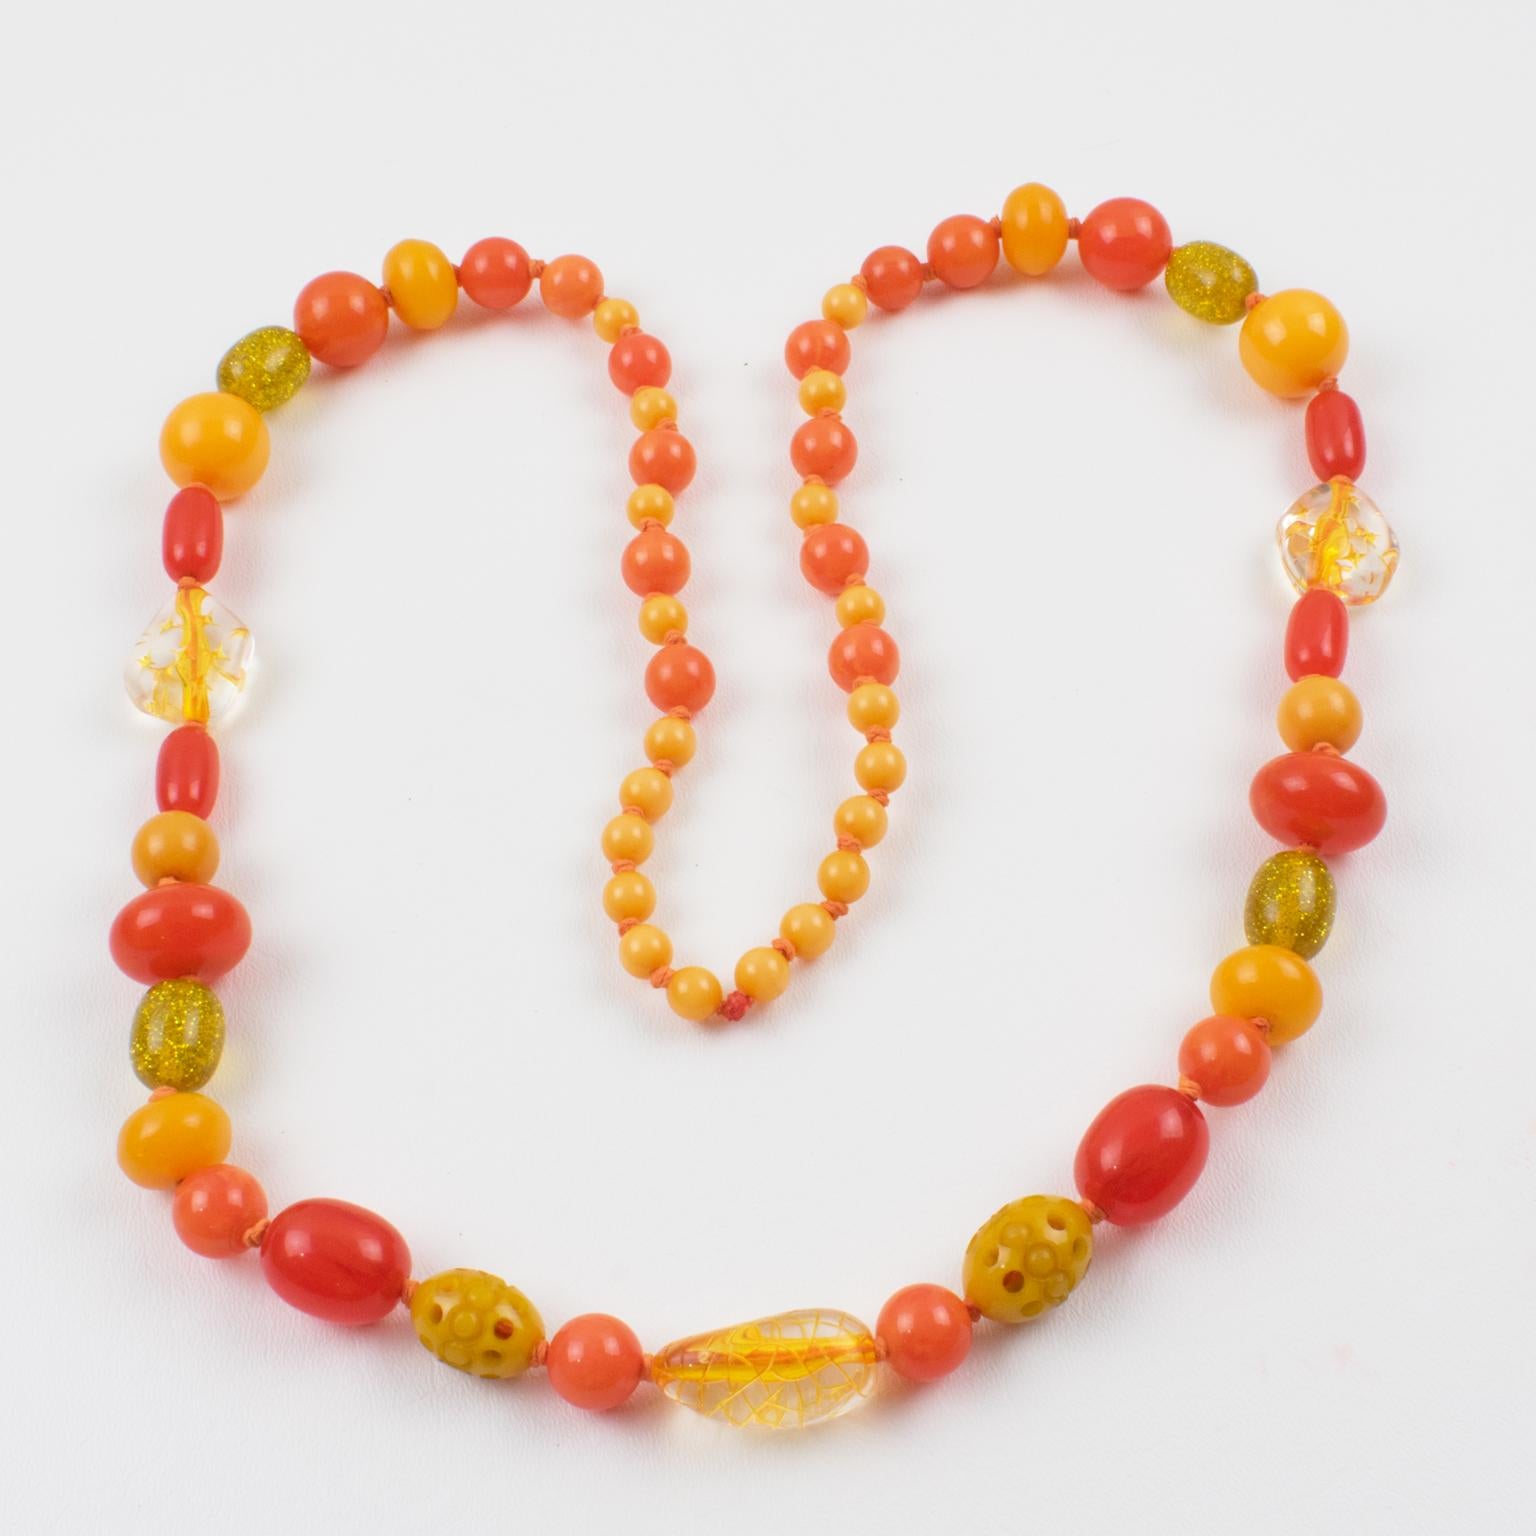 Colorful extra-long Bakelite and Lucite necklace. Assorted beads in various carved shapes: round, tomato, and oval, some with carving, and some with a pattern. Mix and match bright sunny colors in assorted tones of butterscotch, yellow saffron,